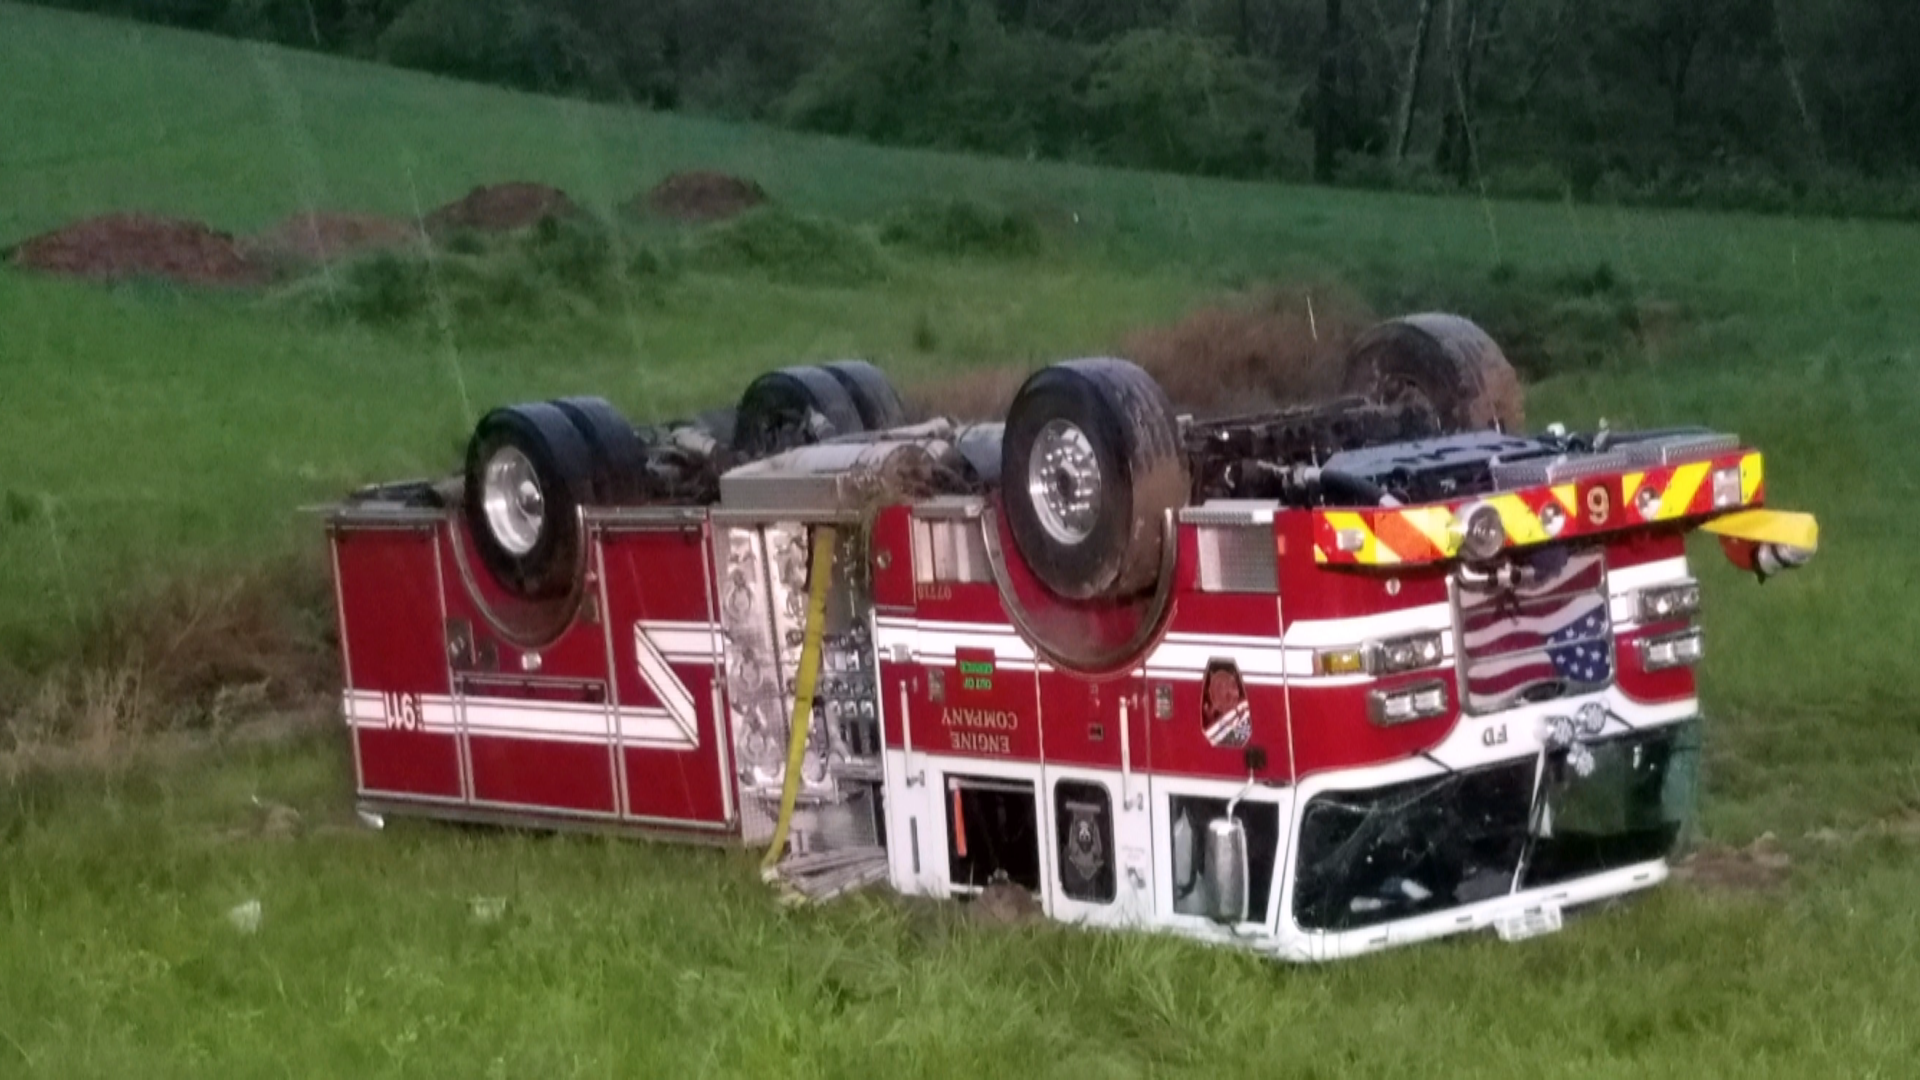 Three firefighters are recovering from injuries after their truck flipped upside down while responding to a house fire.